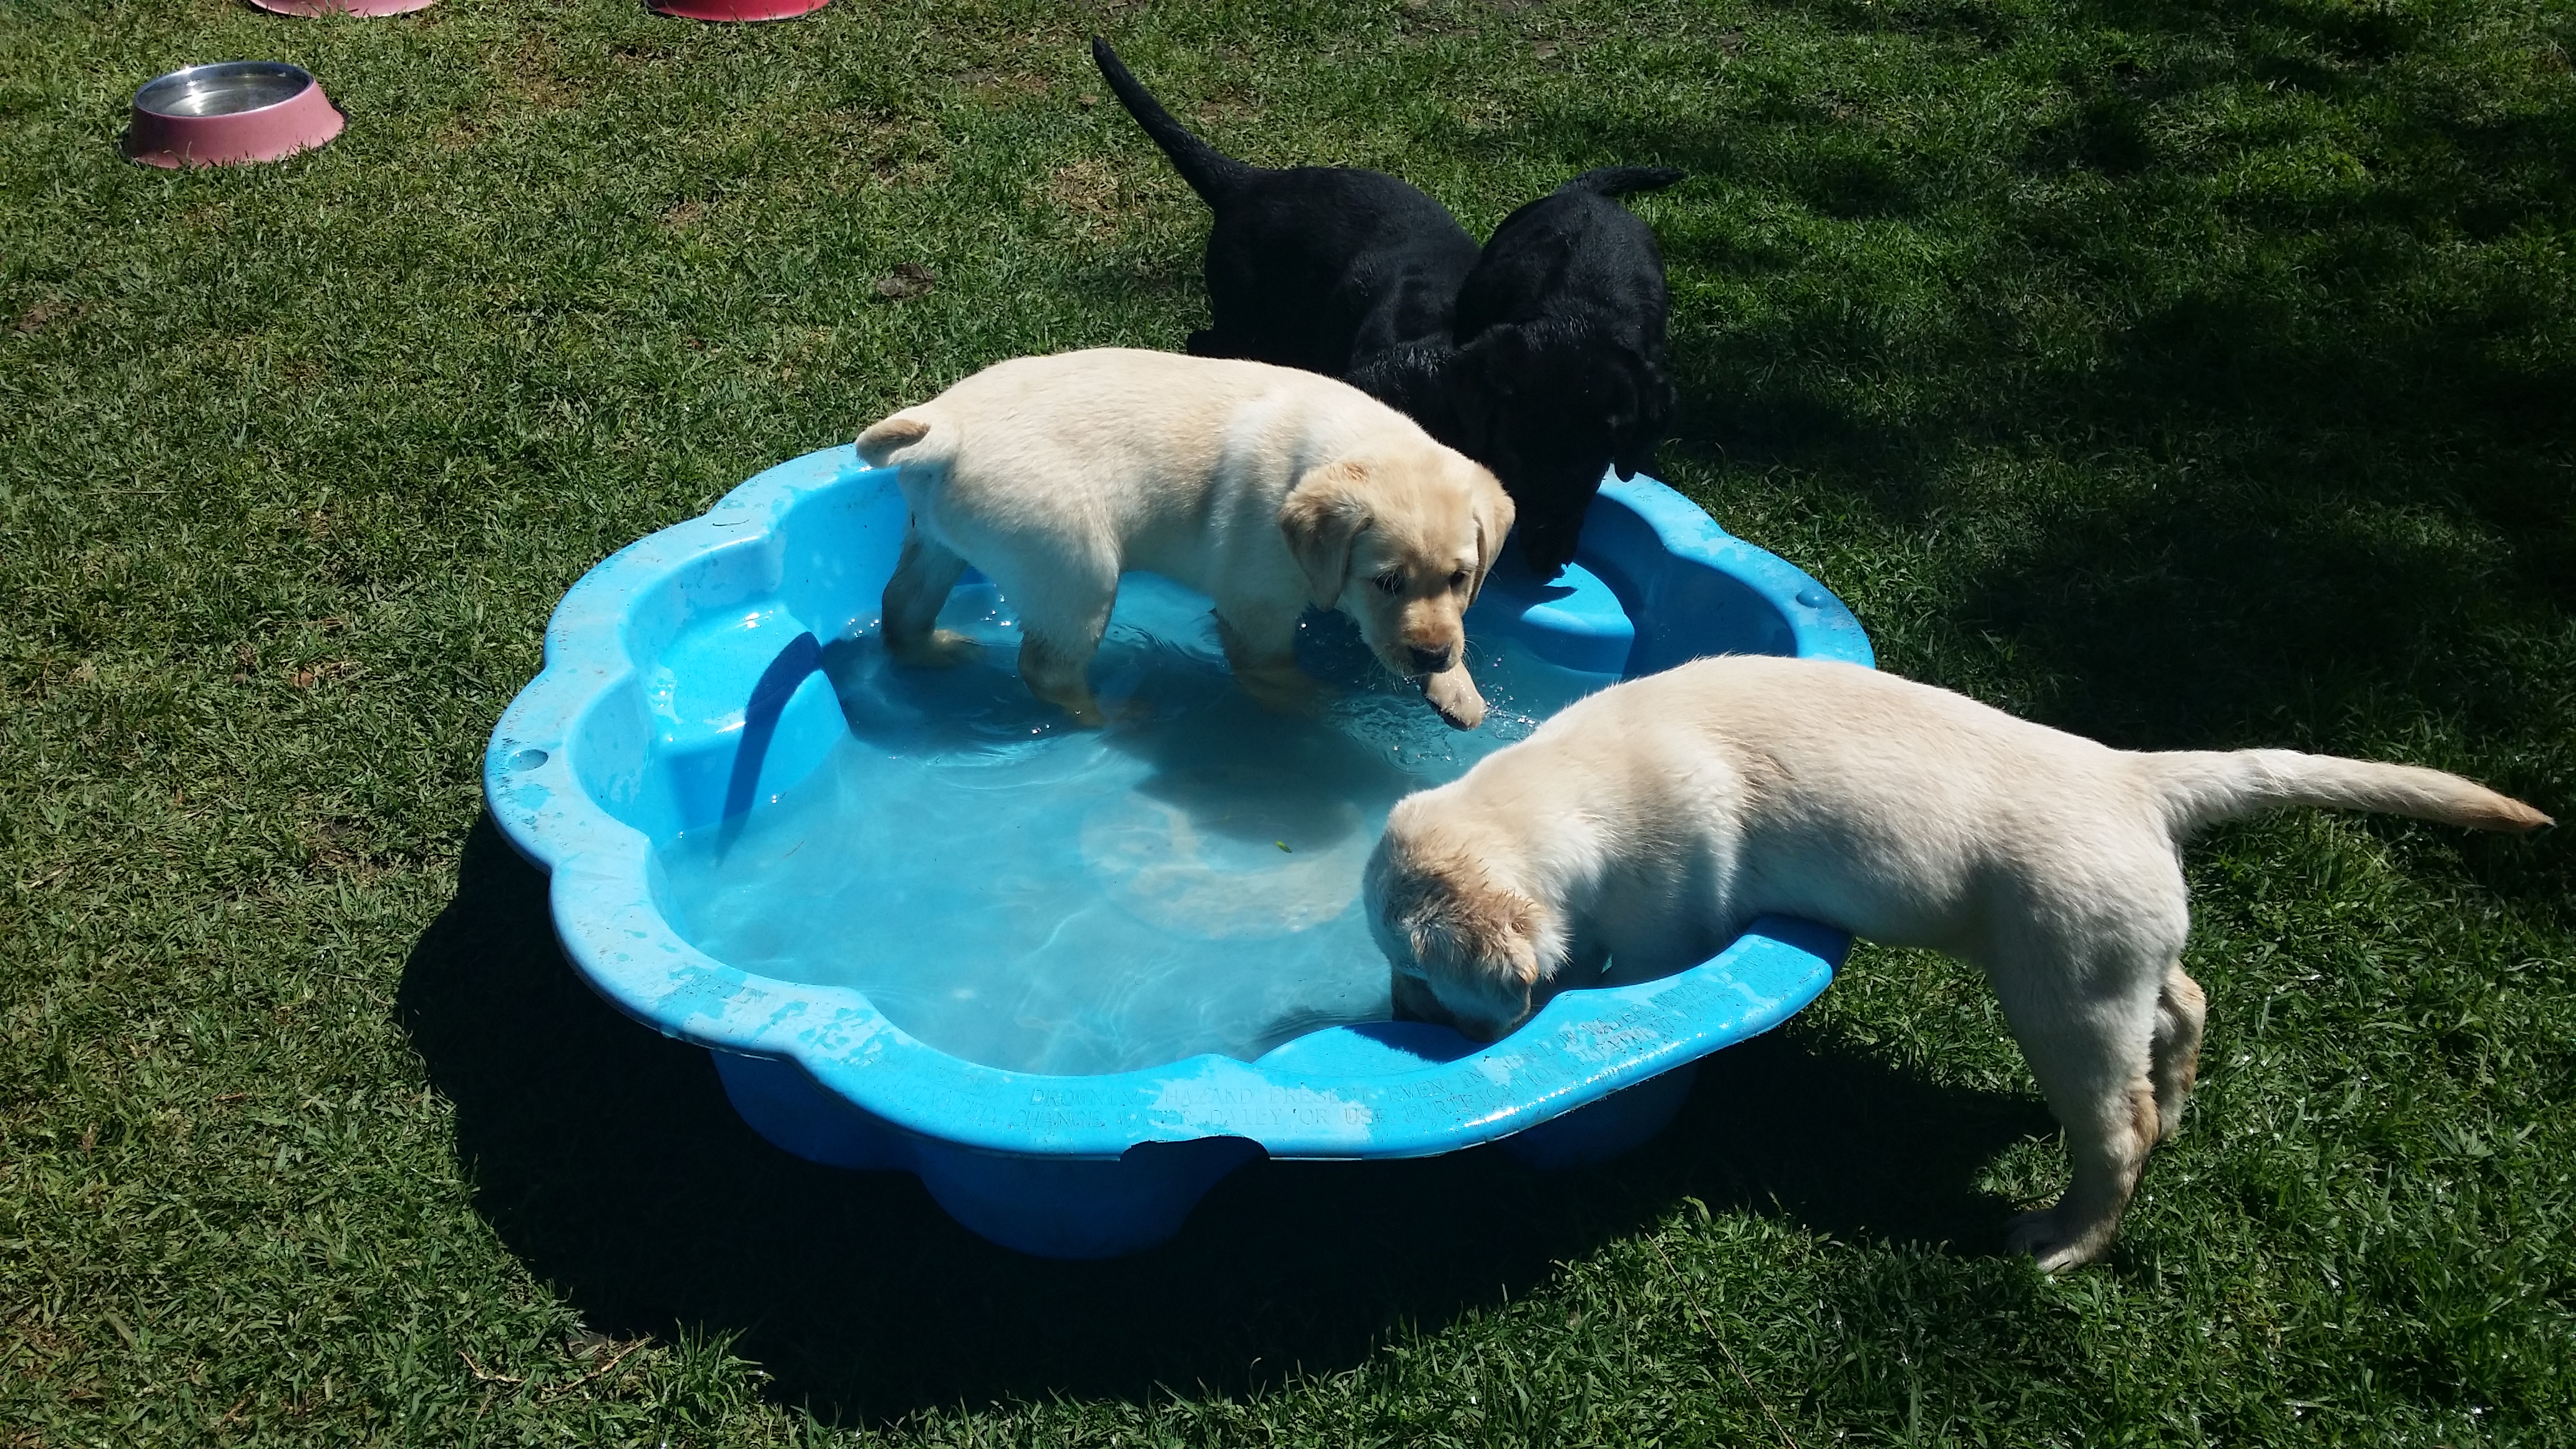 Cooling off in the pool